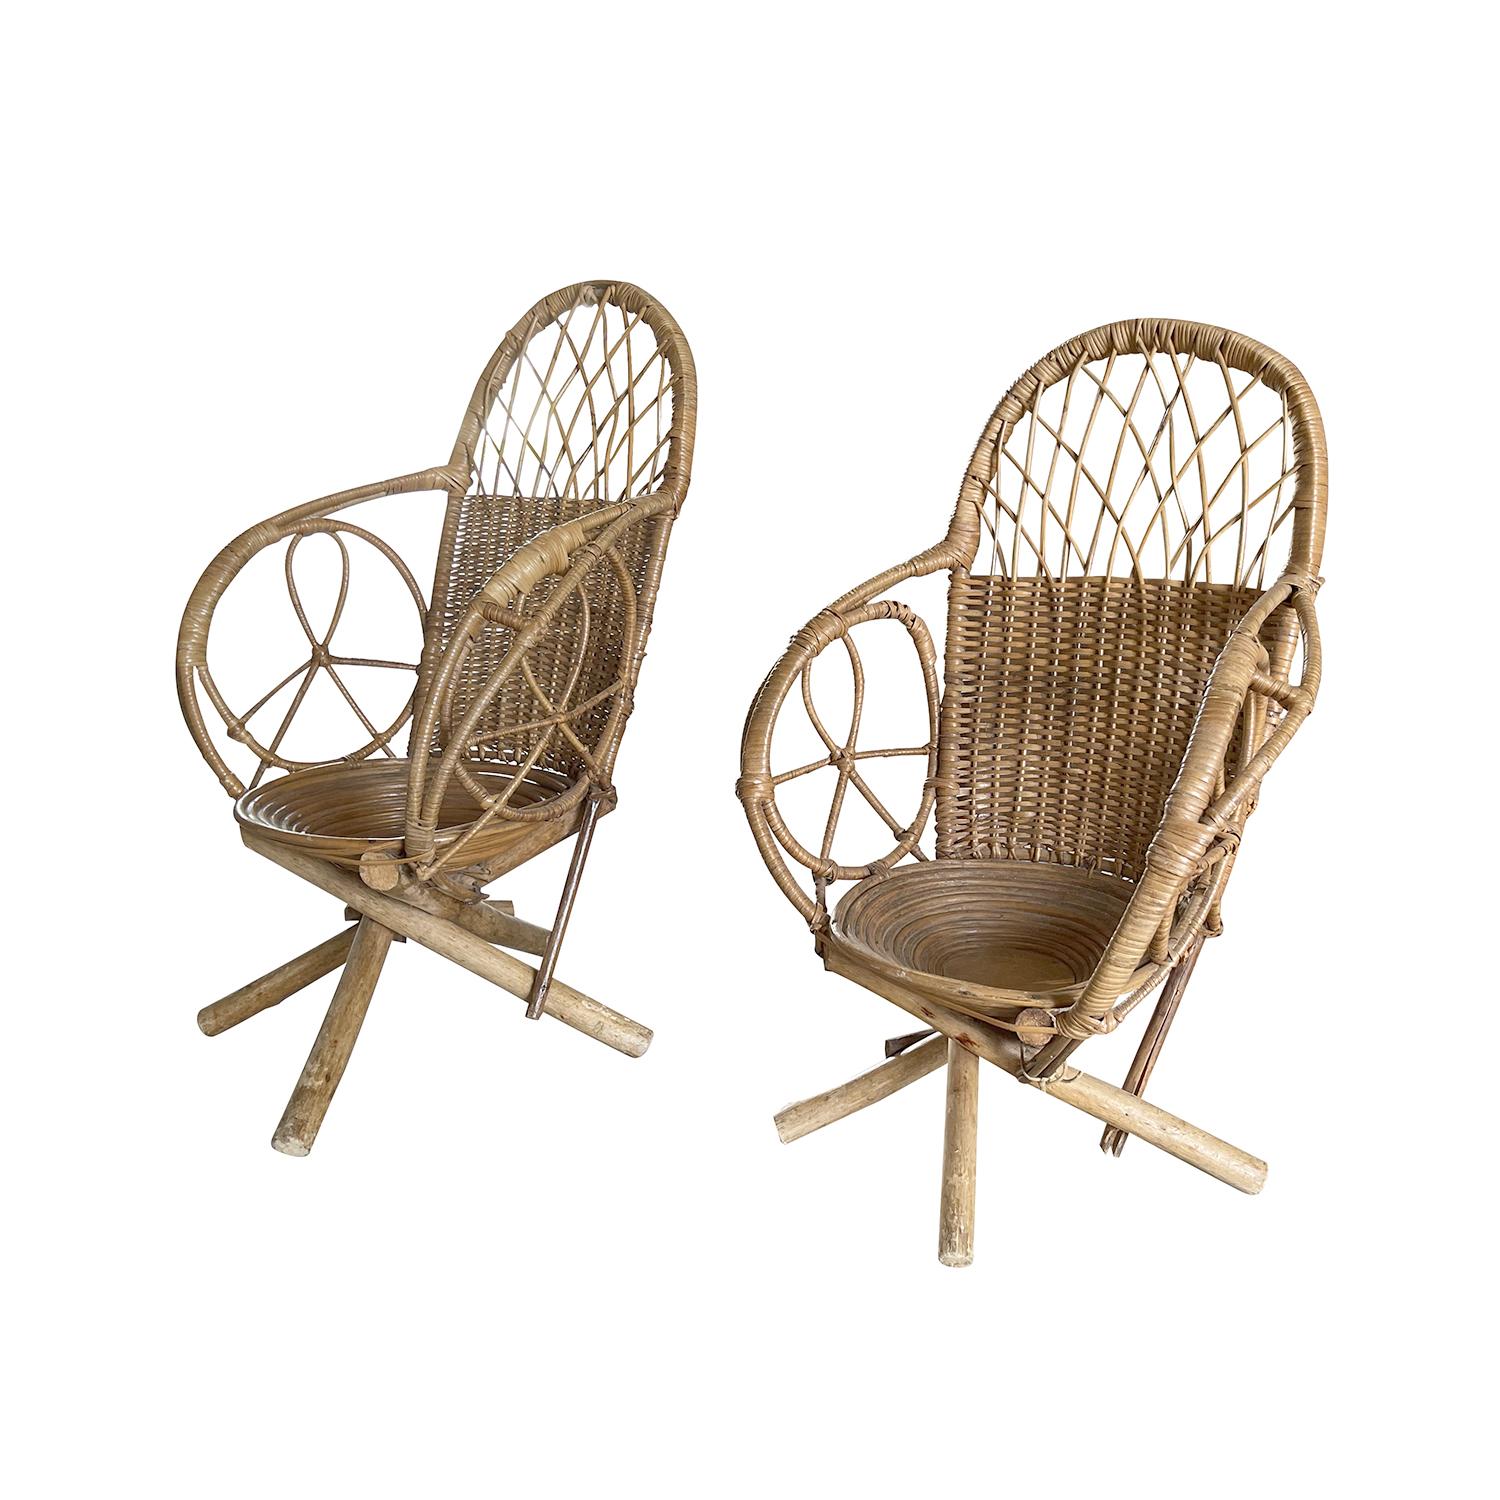 A rare, vintage Mid-Century Modern Italian pair of children chairs made of handcrafted Rattan and wicker in the style of Franco Albini, in good condition. The very decorative seat spiral shell was made of rattan, on four rustic wooden legs. Wear